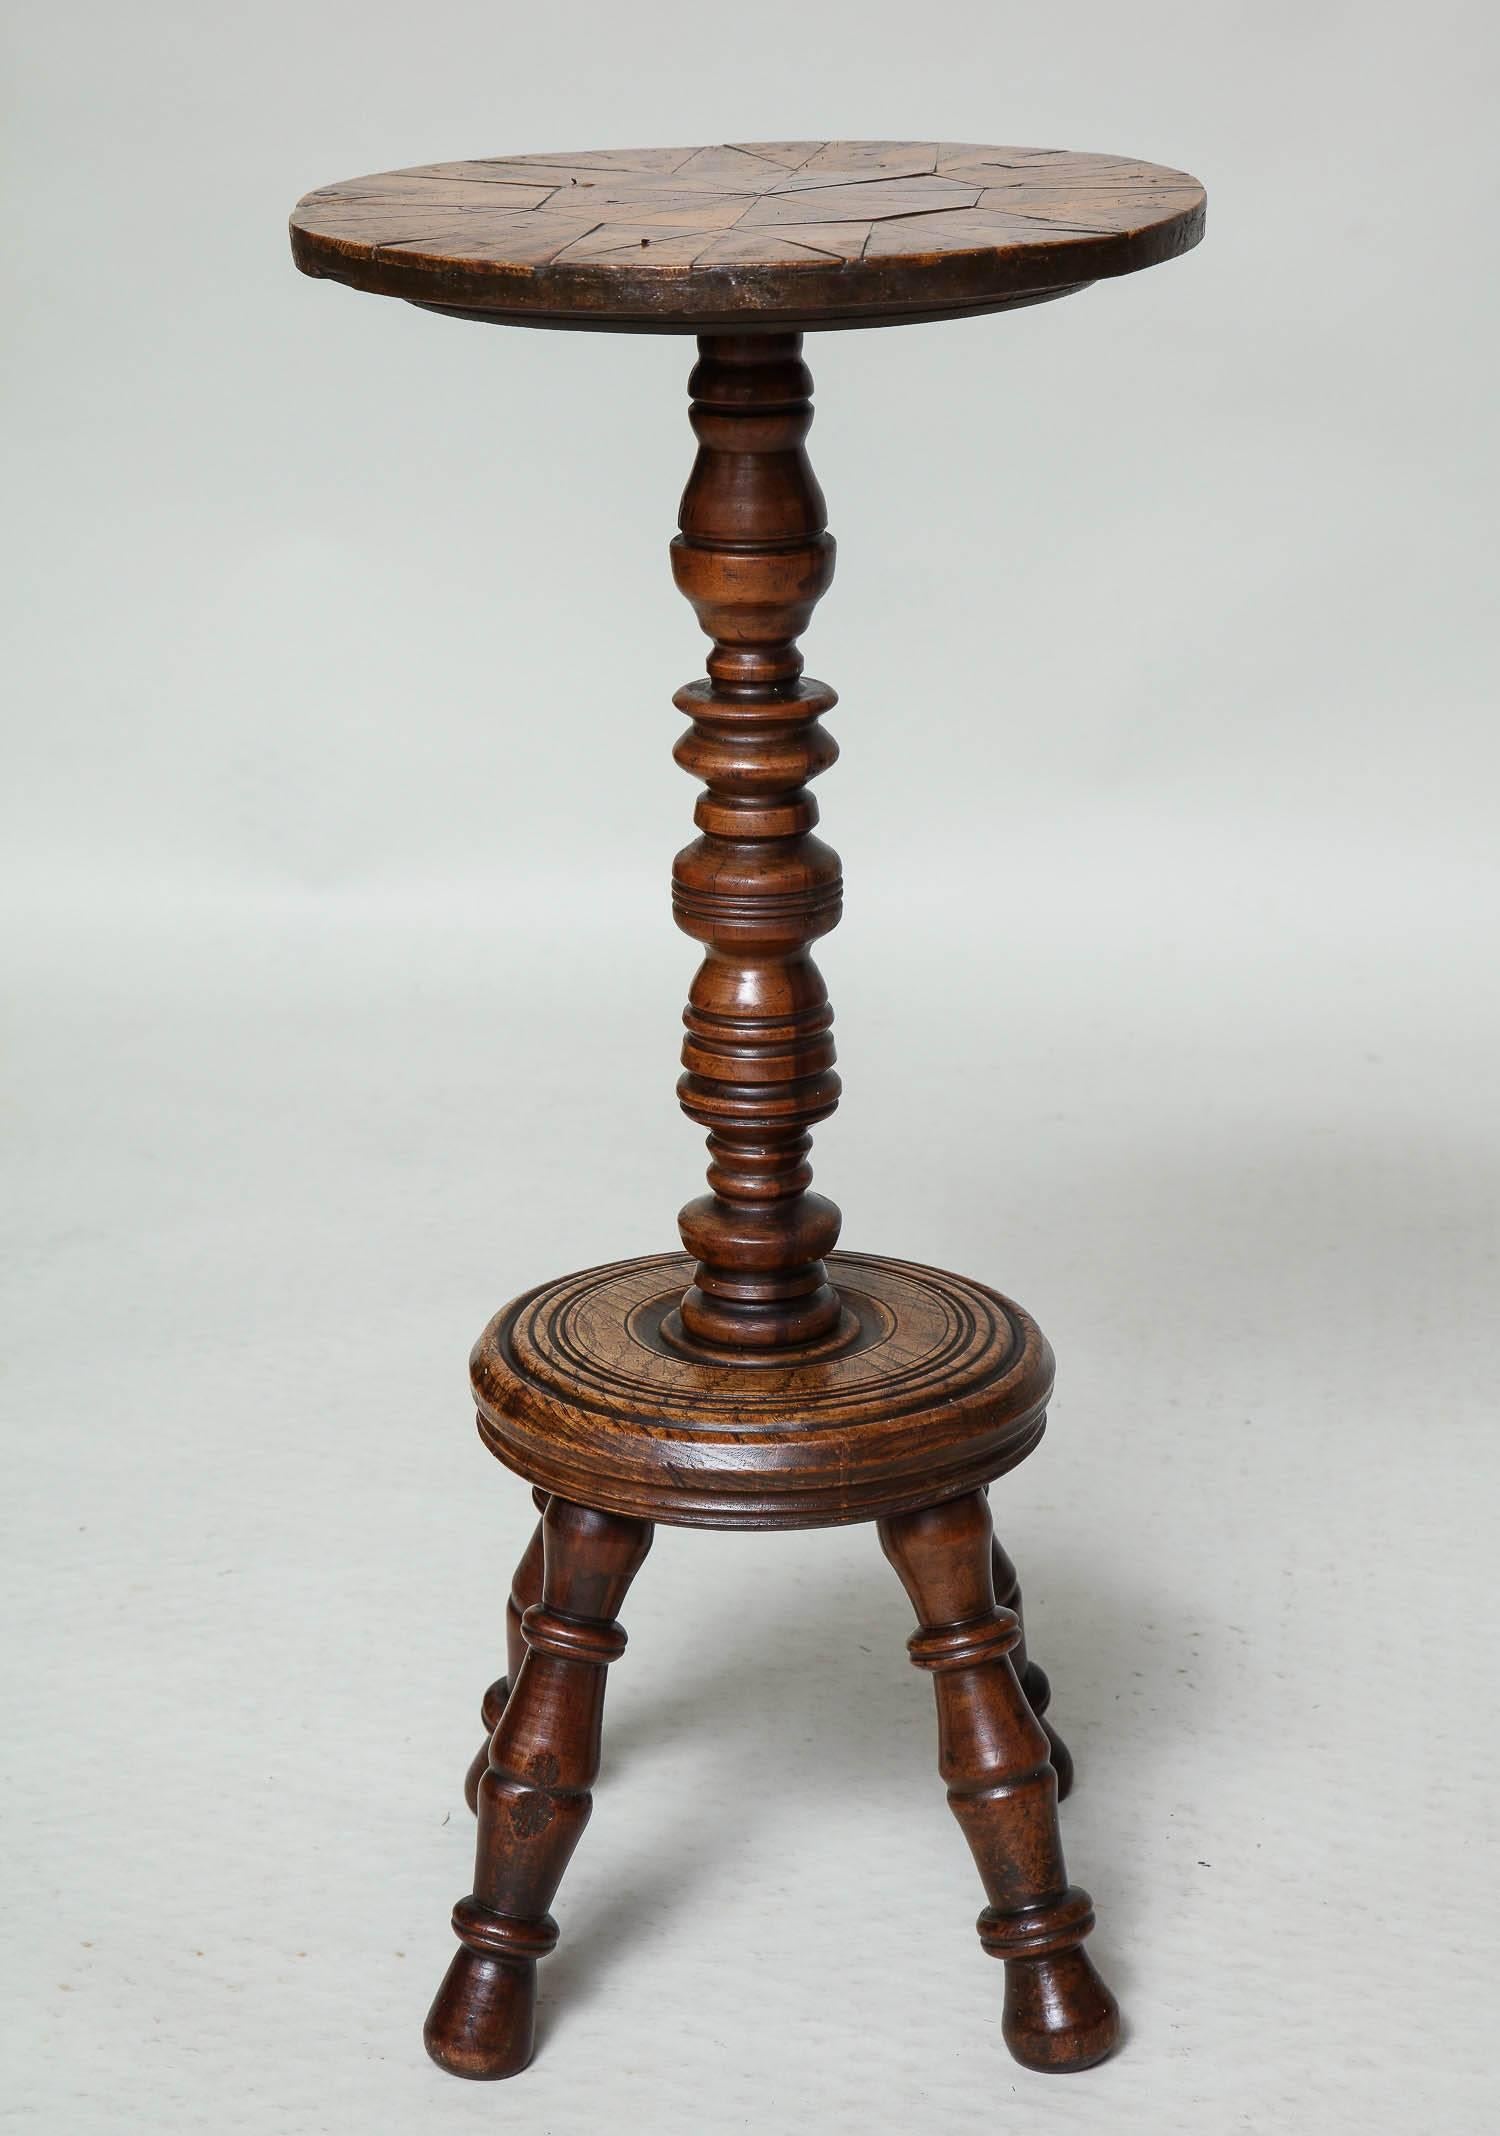 Great Britain (UK) Rare Ash and Yew Parquetry Table